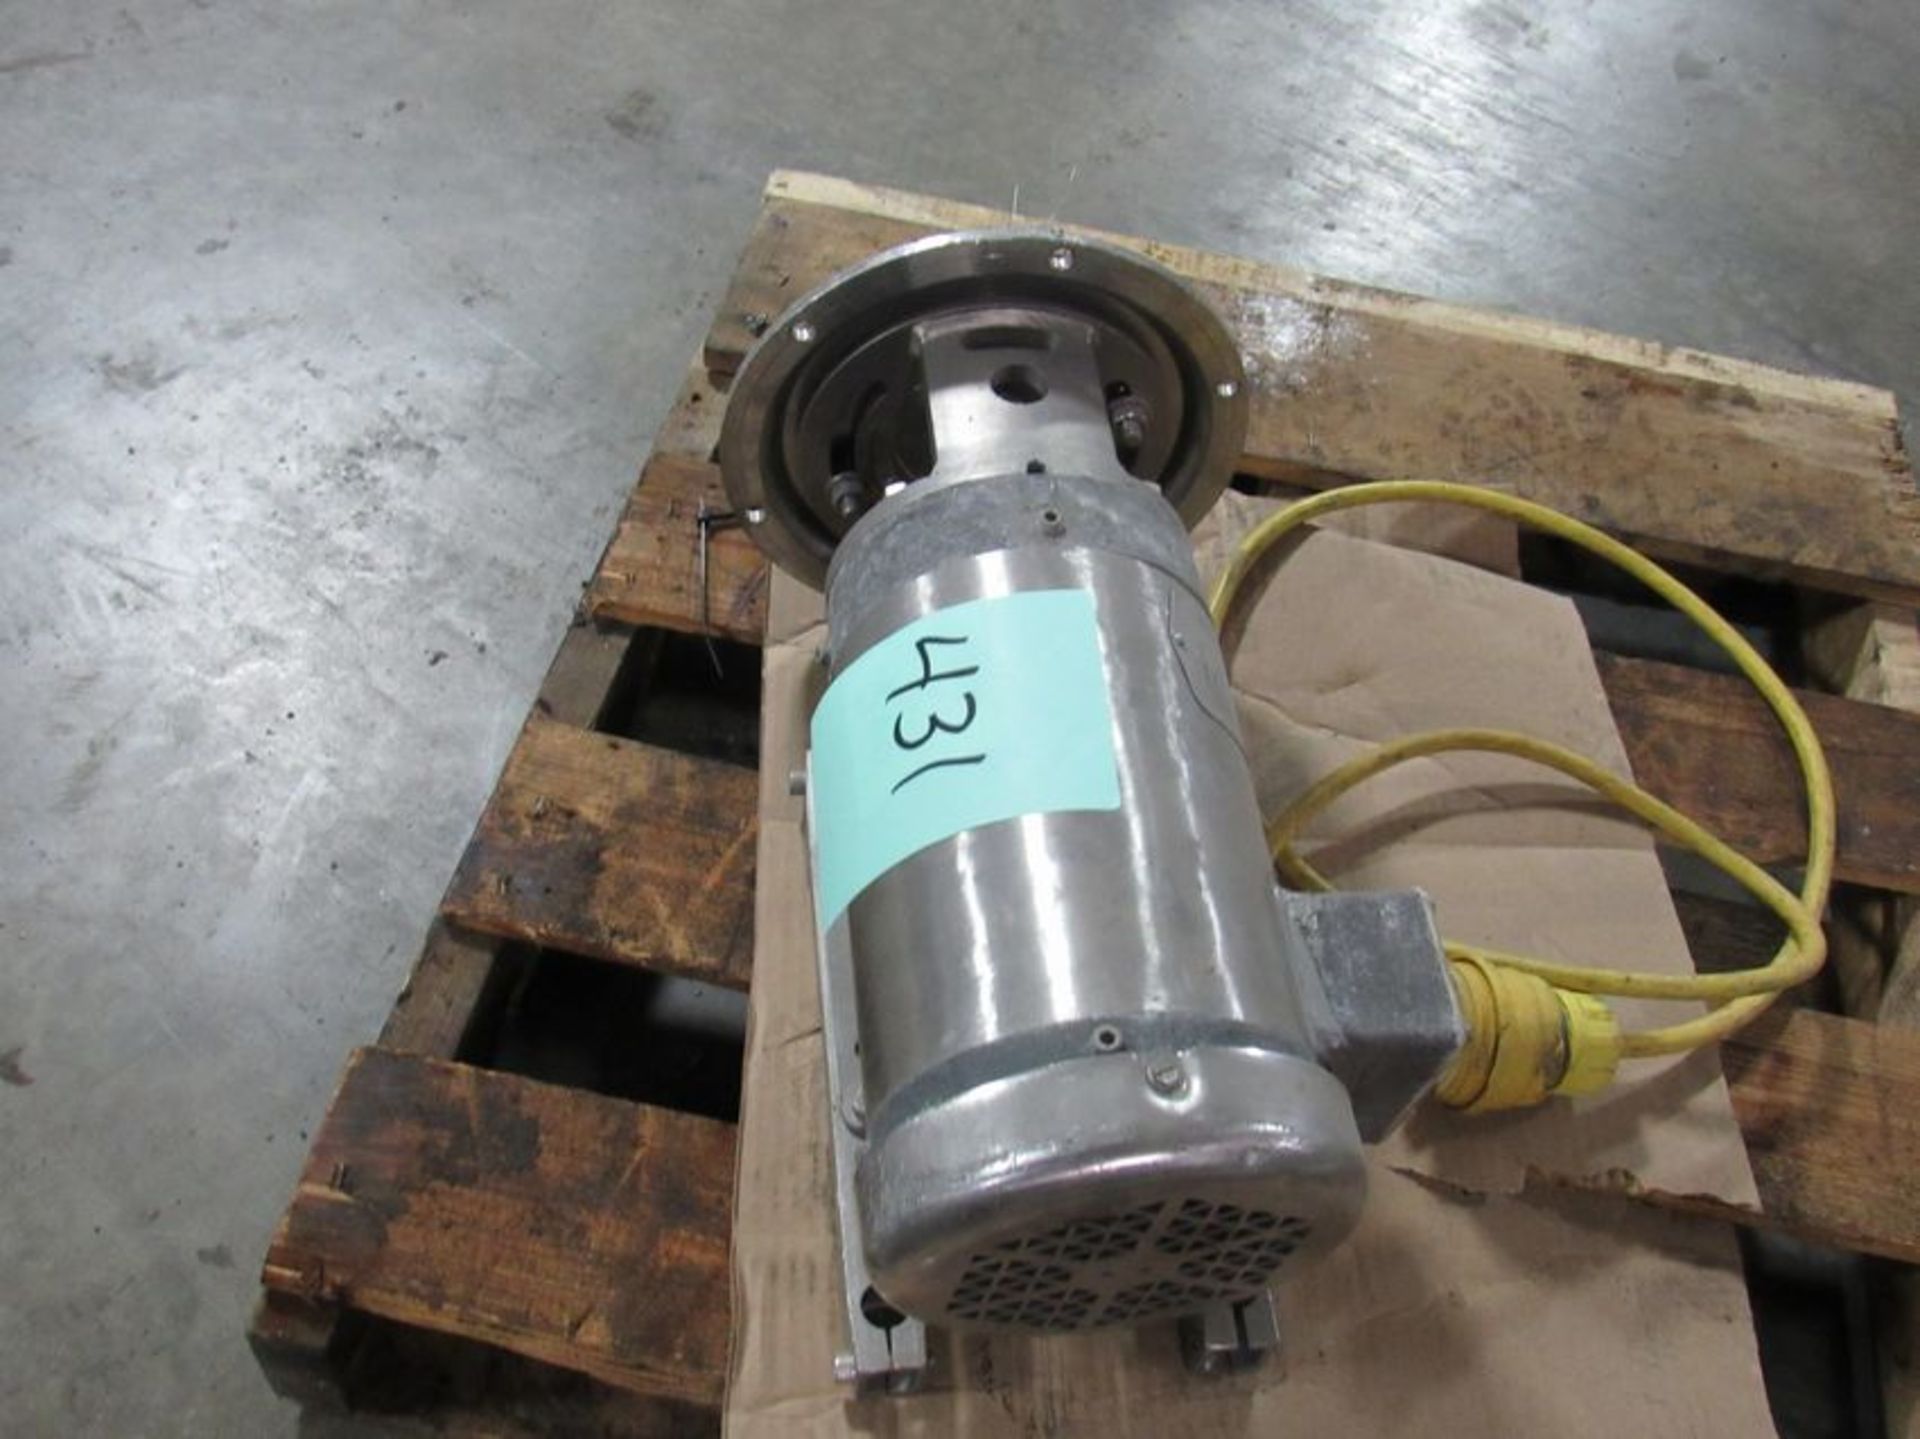 Stainless Steel Dynamic Pump - missing cover. Free Removal and Loading - Located in Iowa - Image 7 of 7